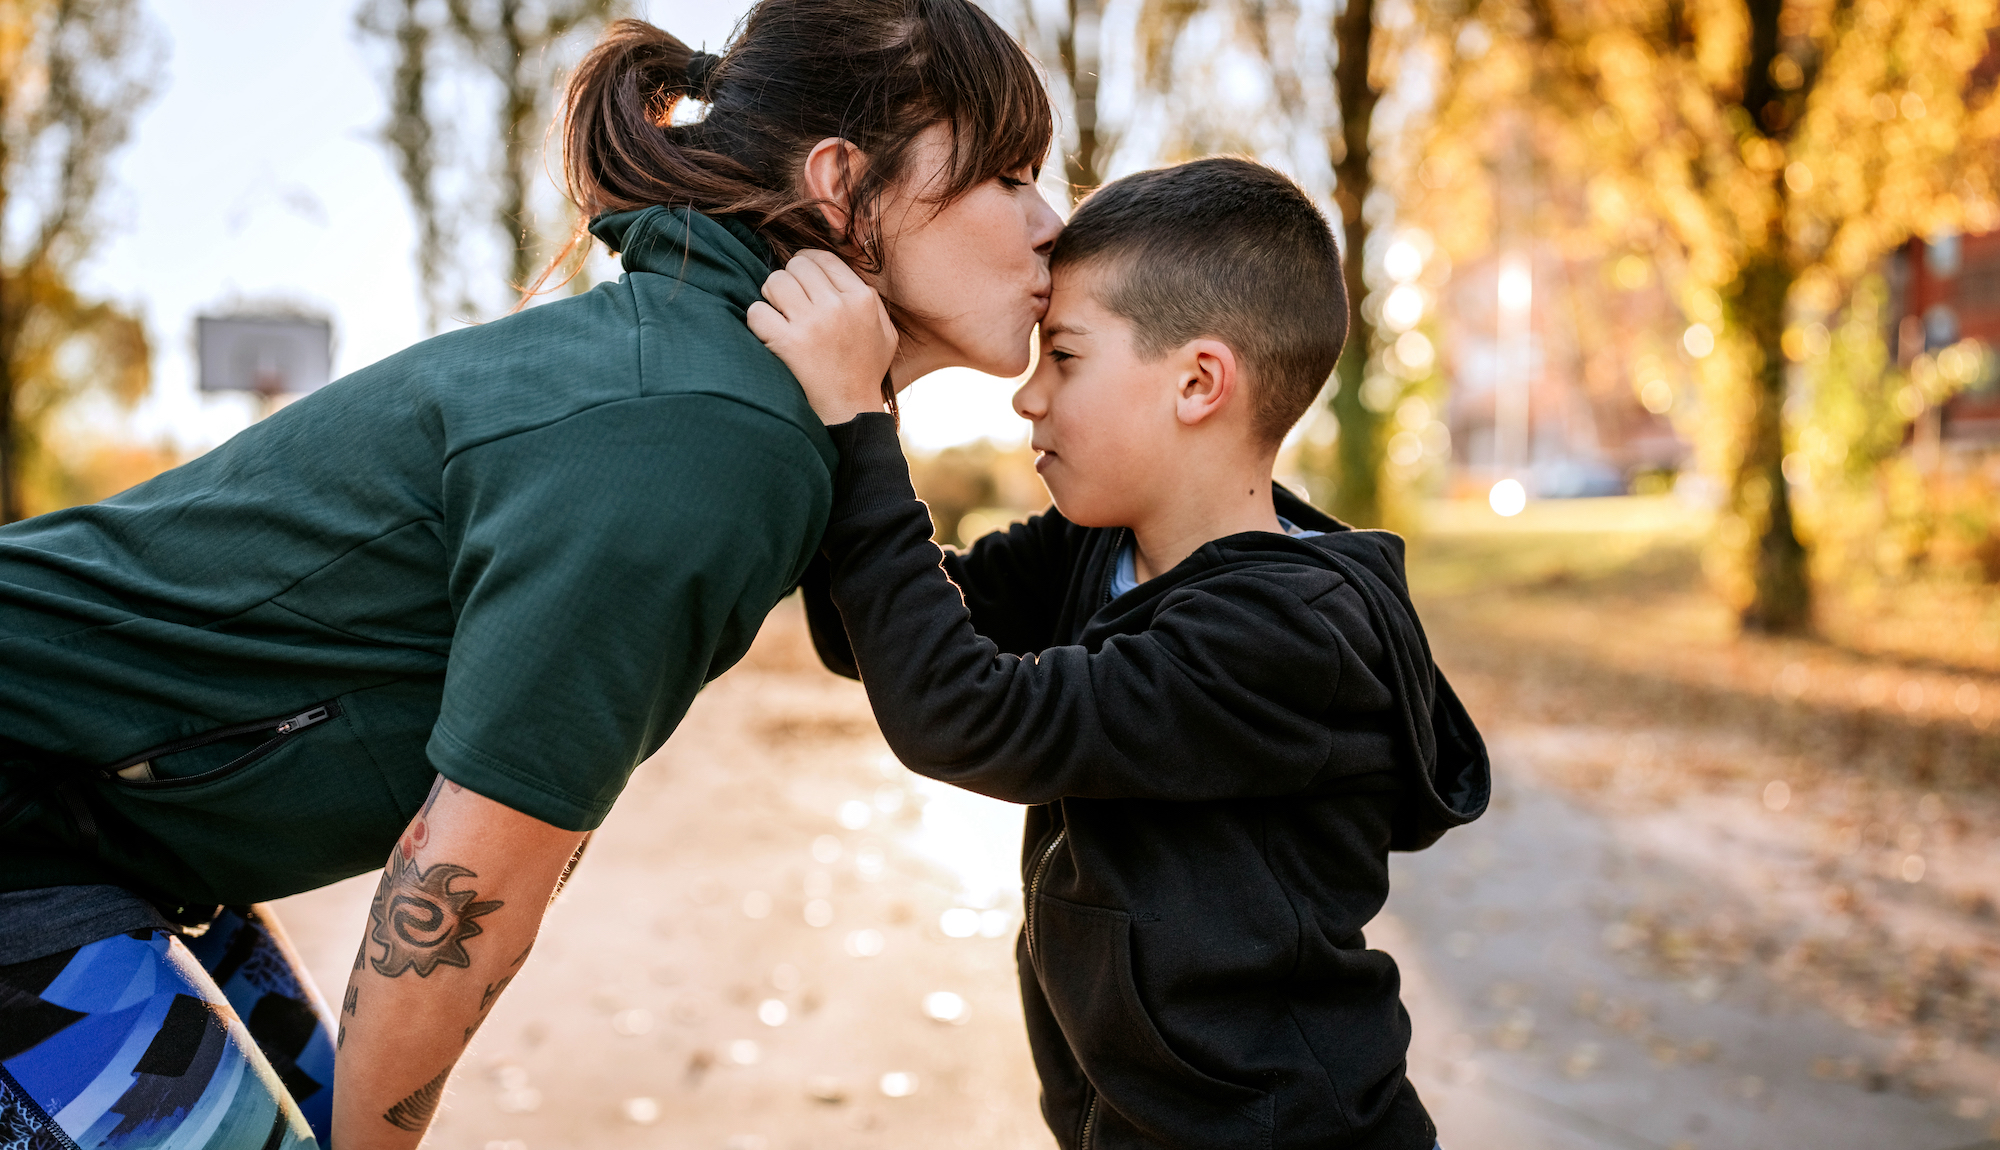 Mom kisses son on forehead in the park